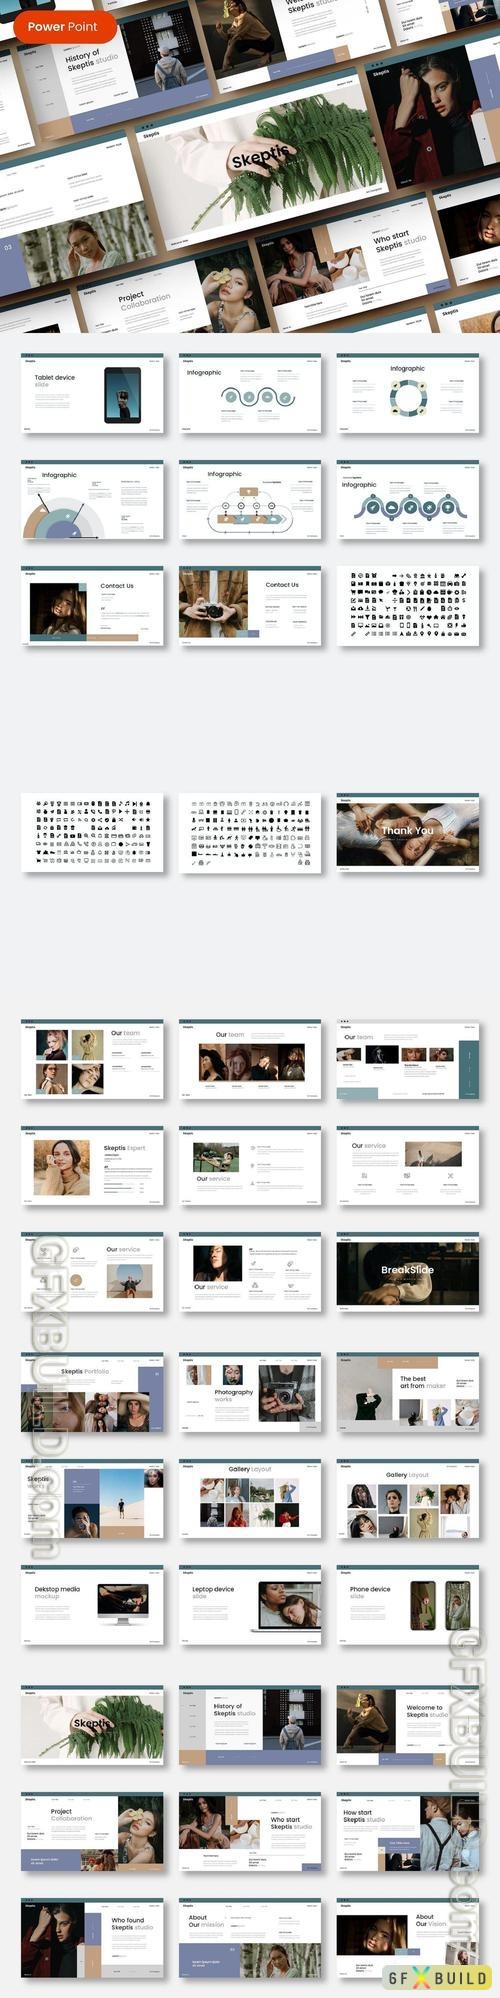 Skeptis - Business PowerPoint Template